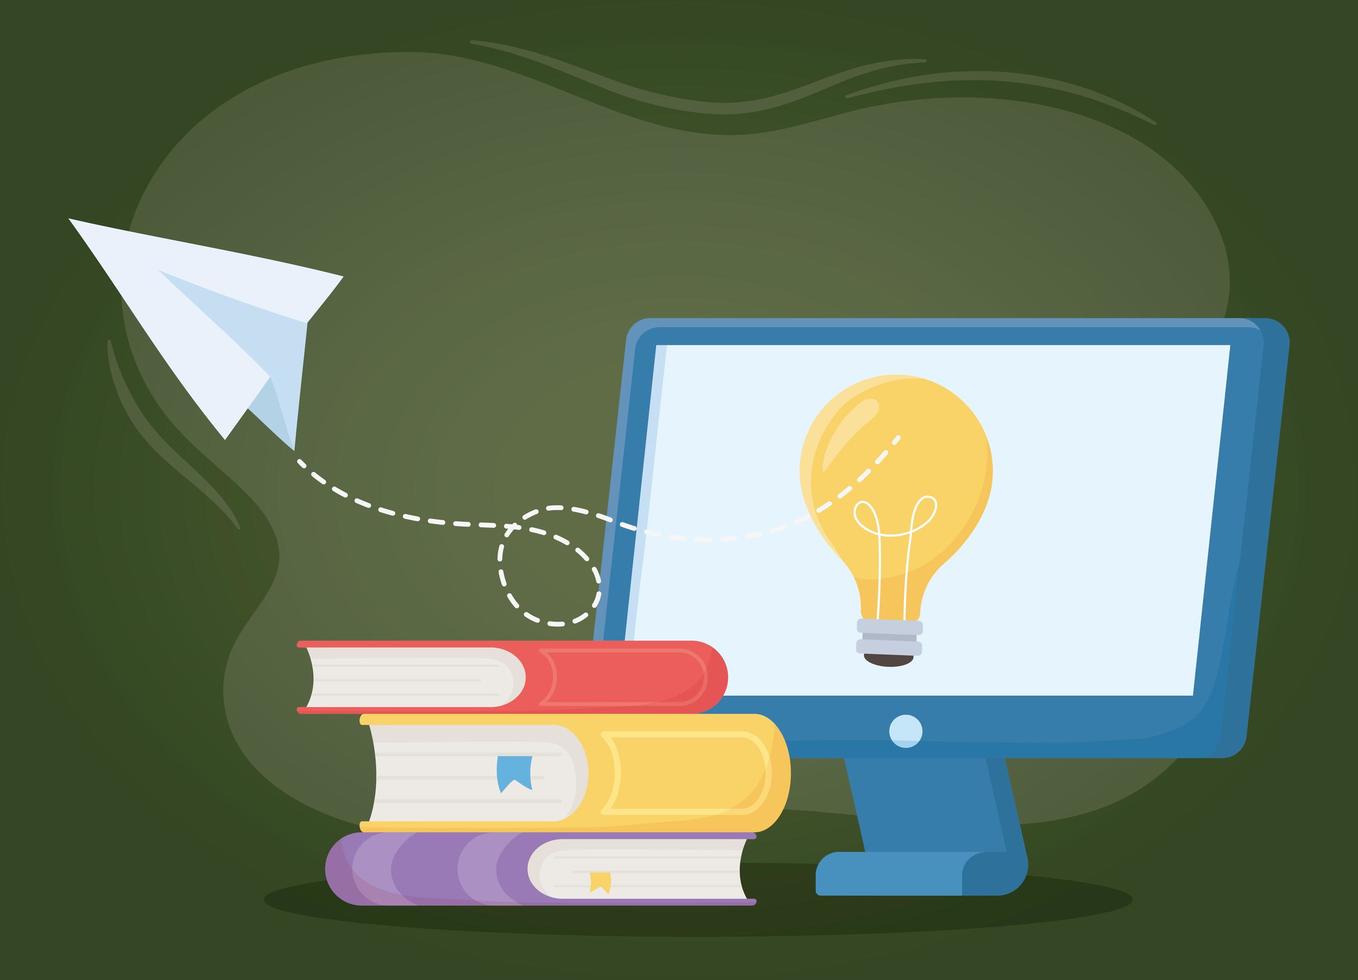 online education, computer idea books and paper plane vector